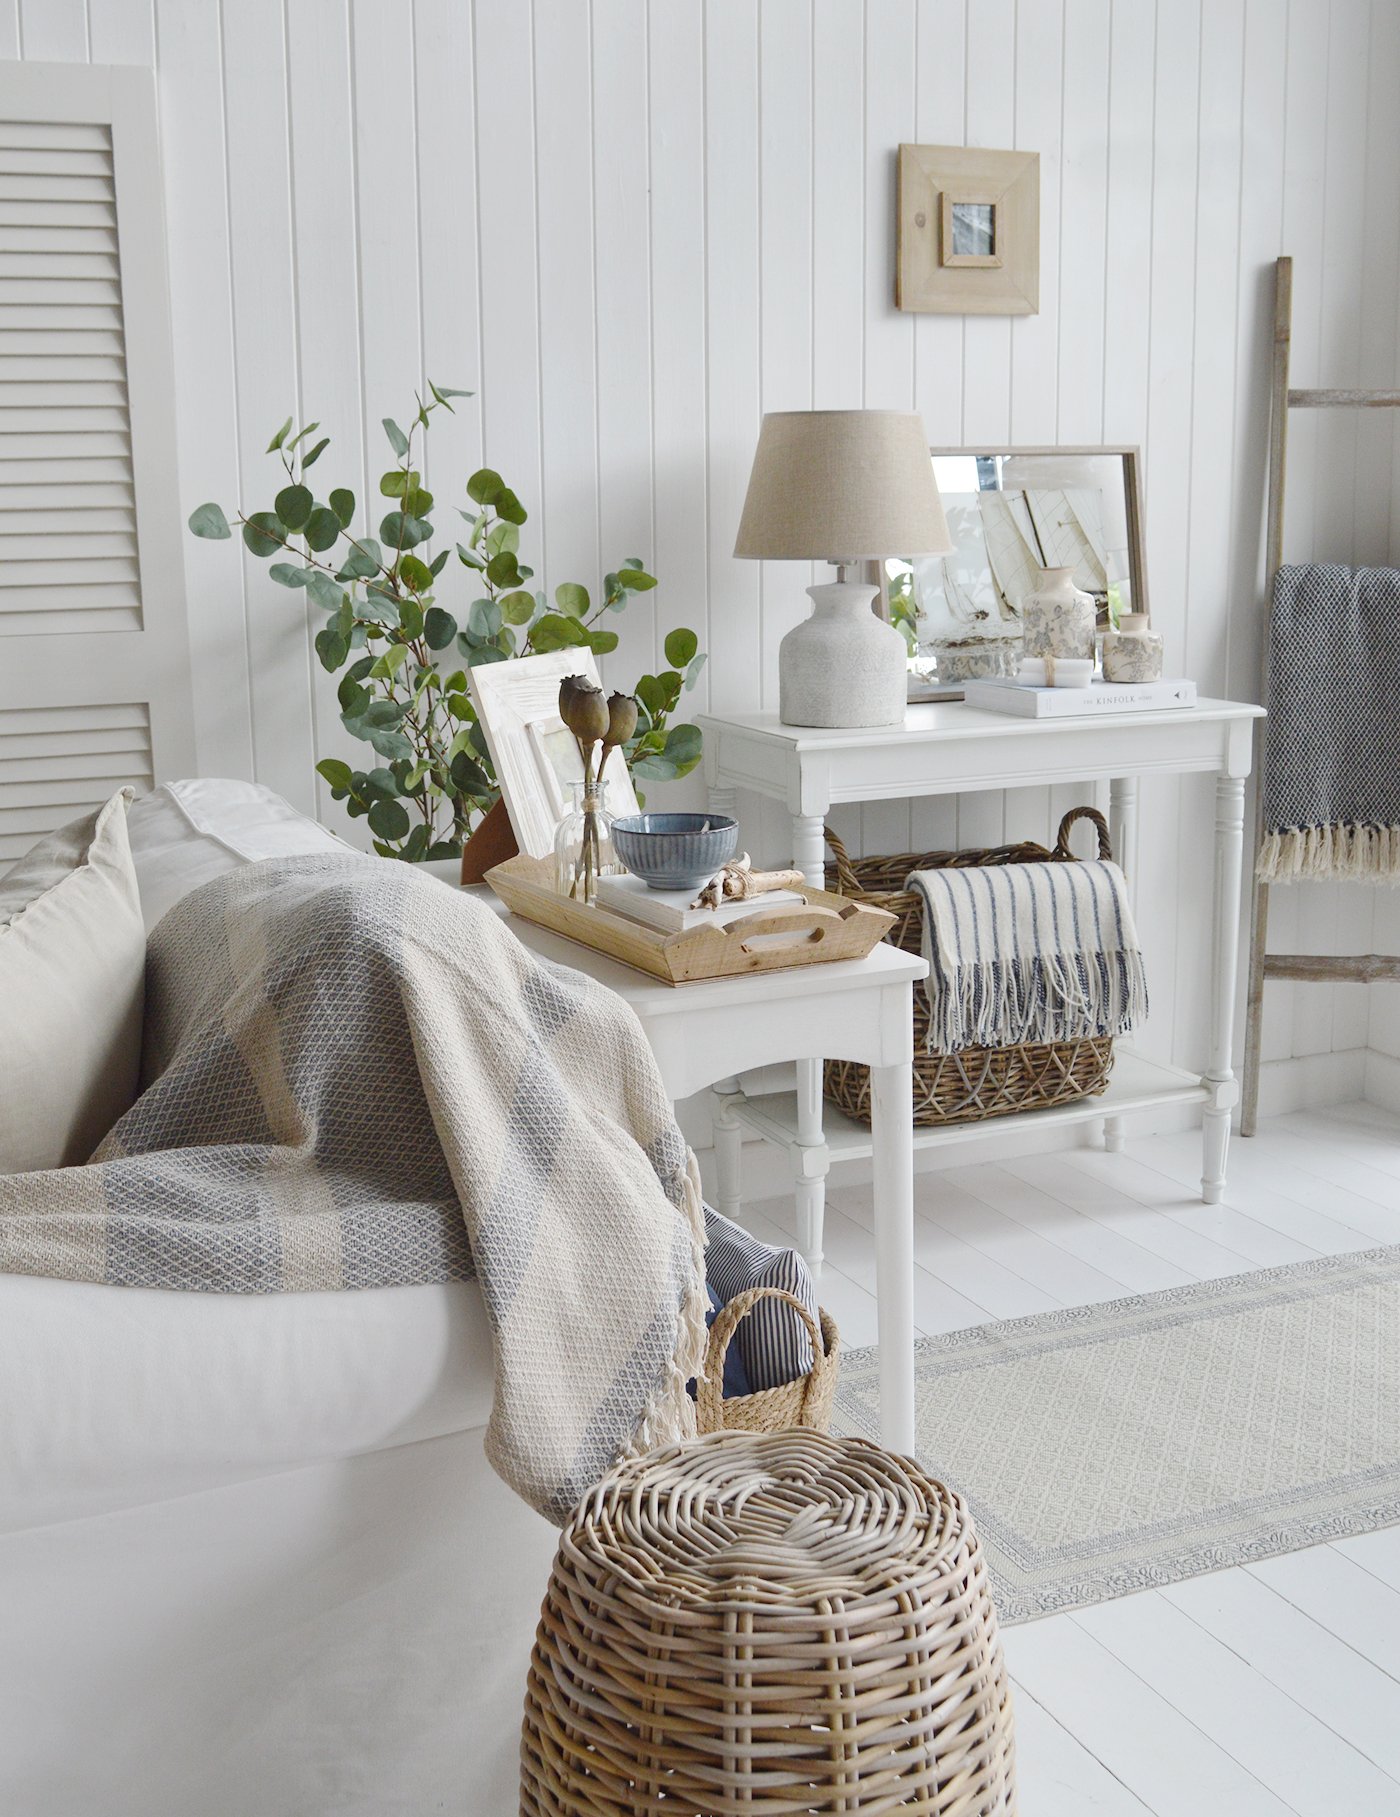 The simple white Cape Ann as a sofa table alongside the origianl Cape Ann to break up a large interior space